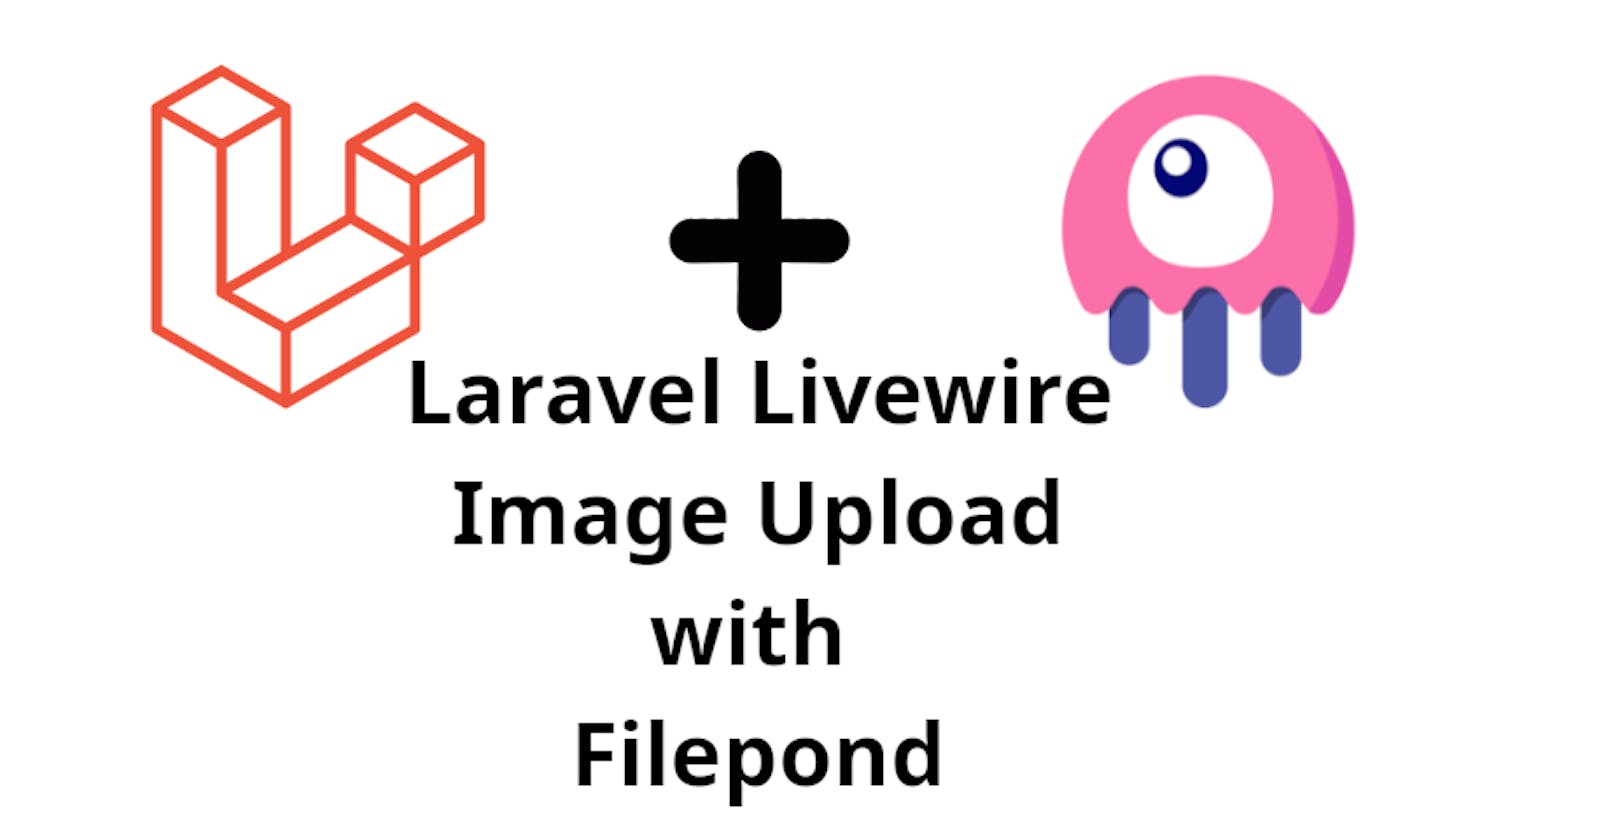 How To Uploads Images with Filepond Laravel Livewire